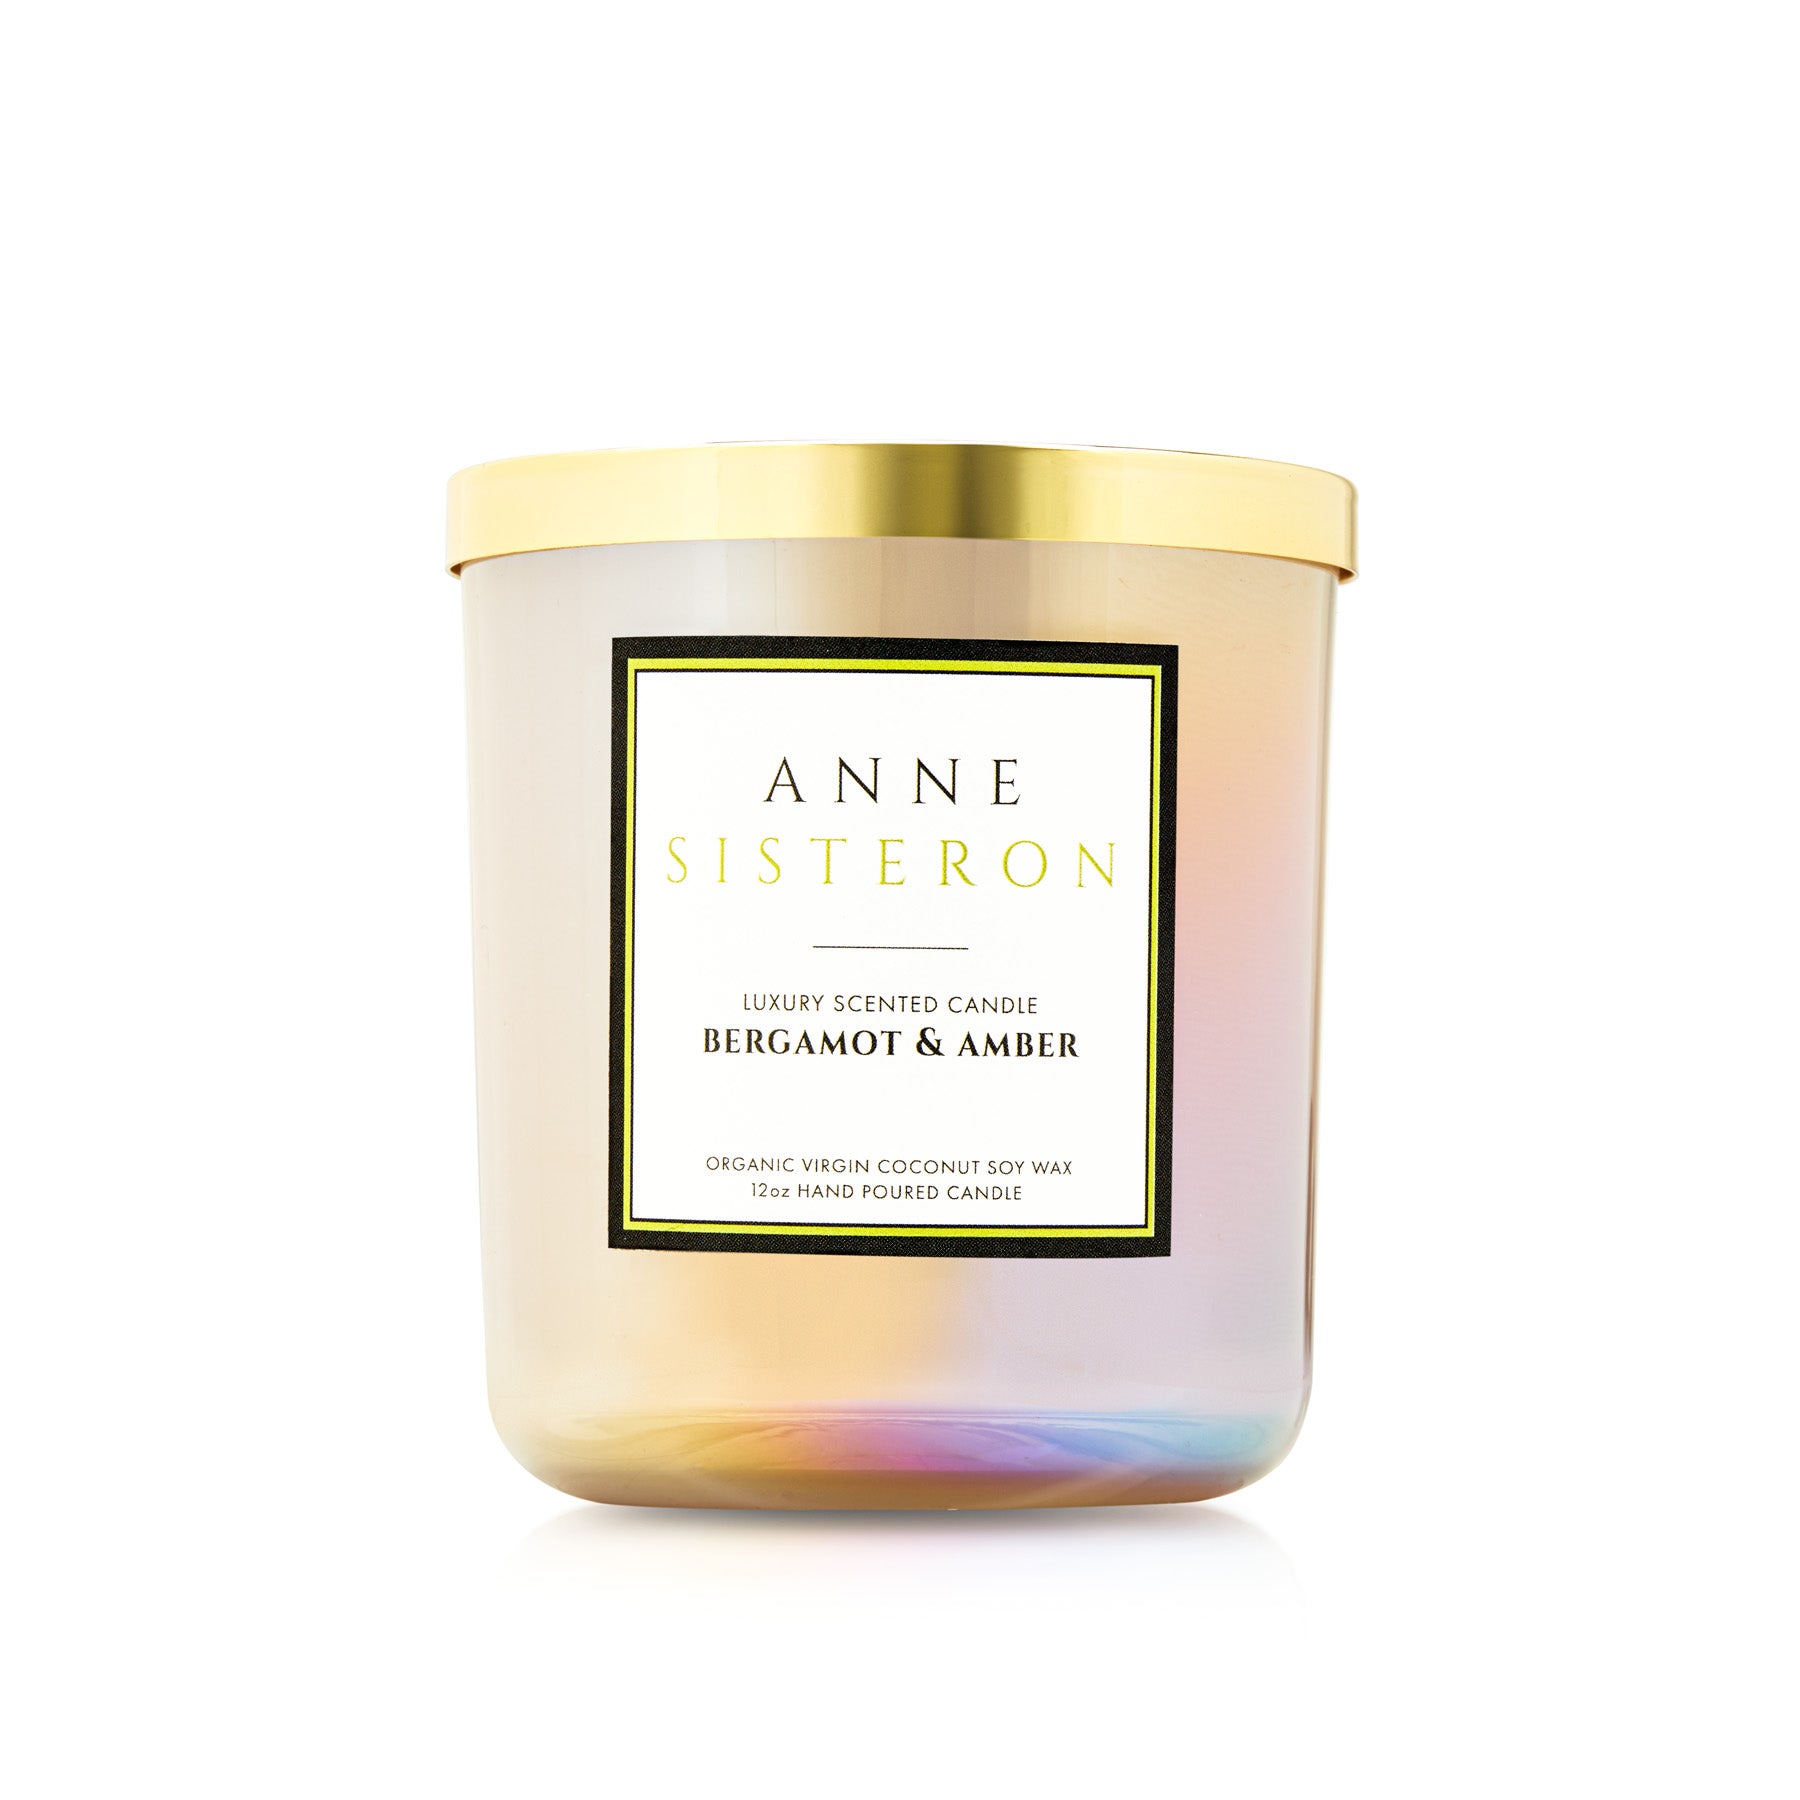 Anne Sisteron Luxury Scented Candle - Bergamot & Amber